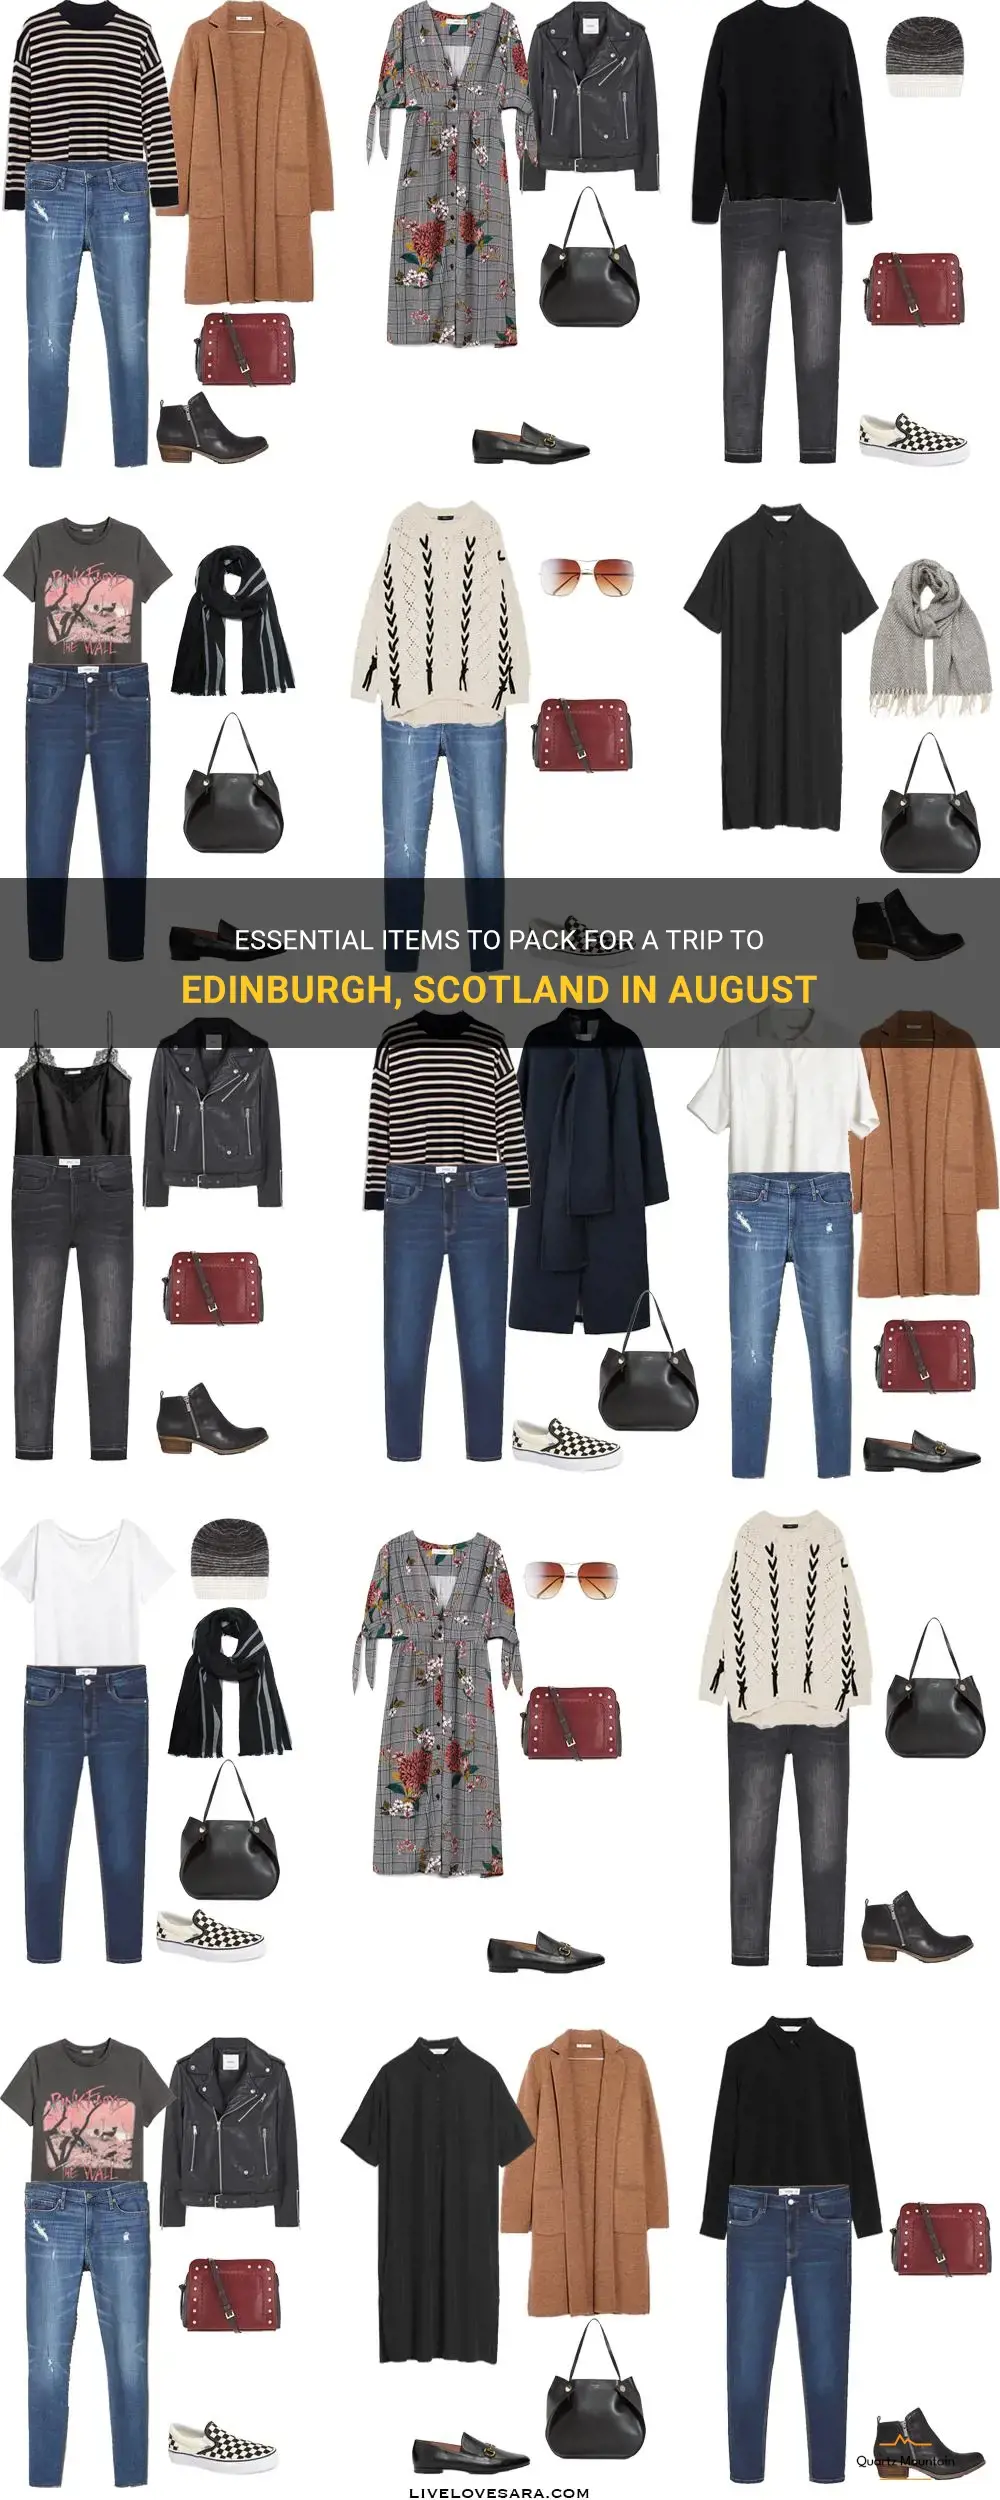 what to pack for trip to edinbourh scotland in august